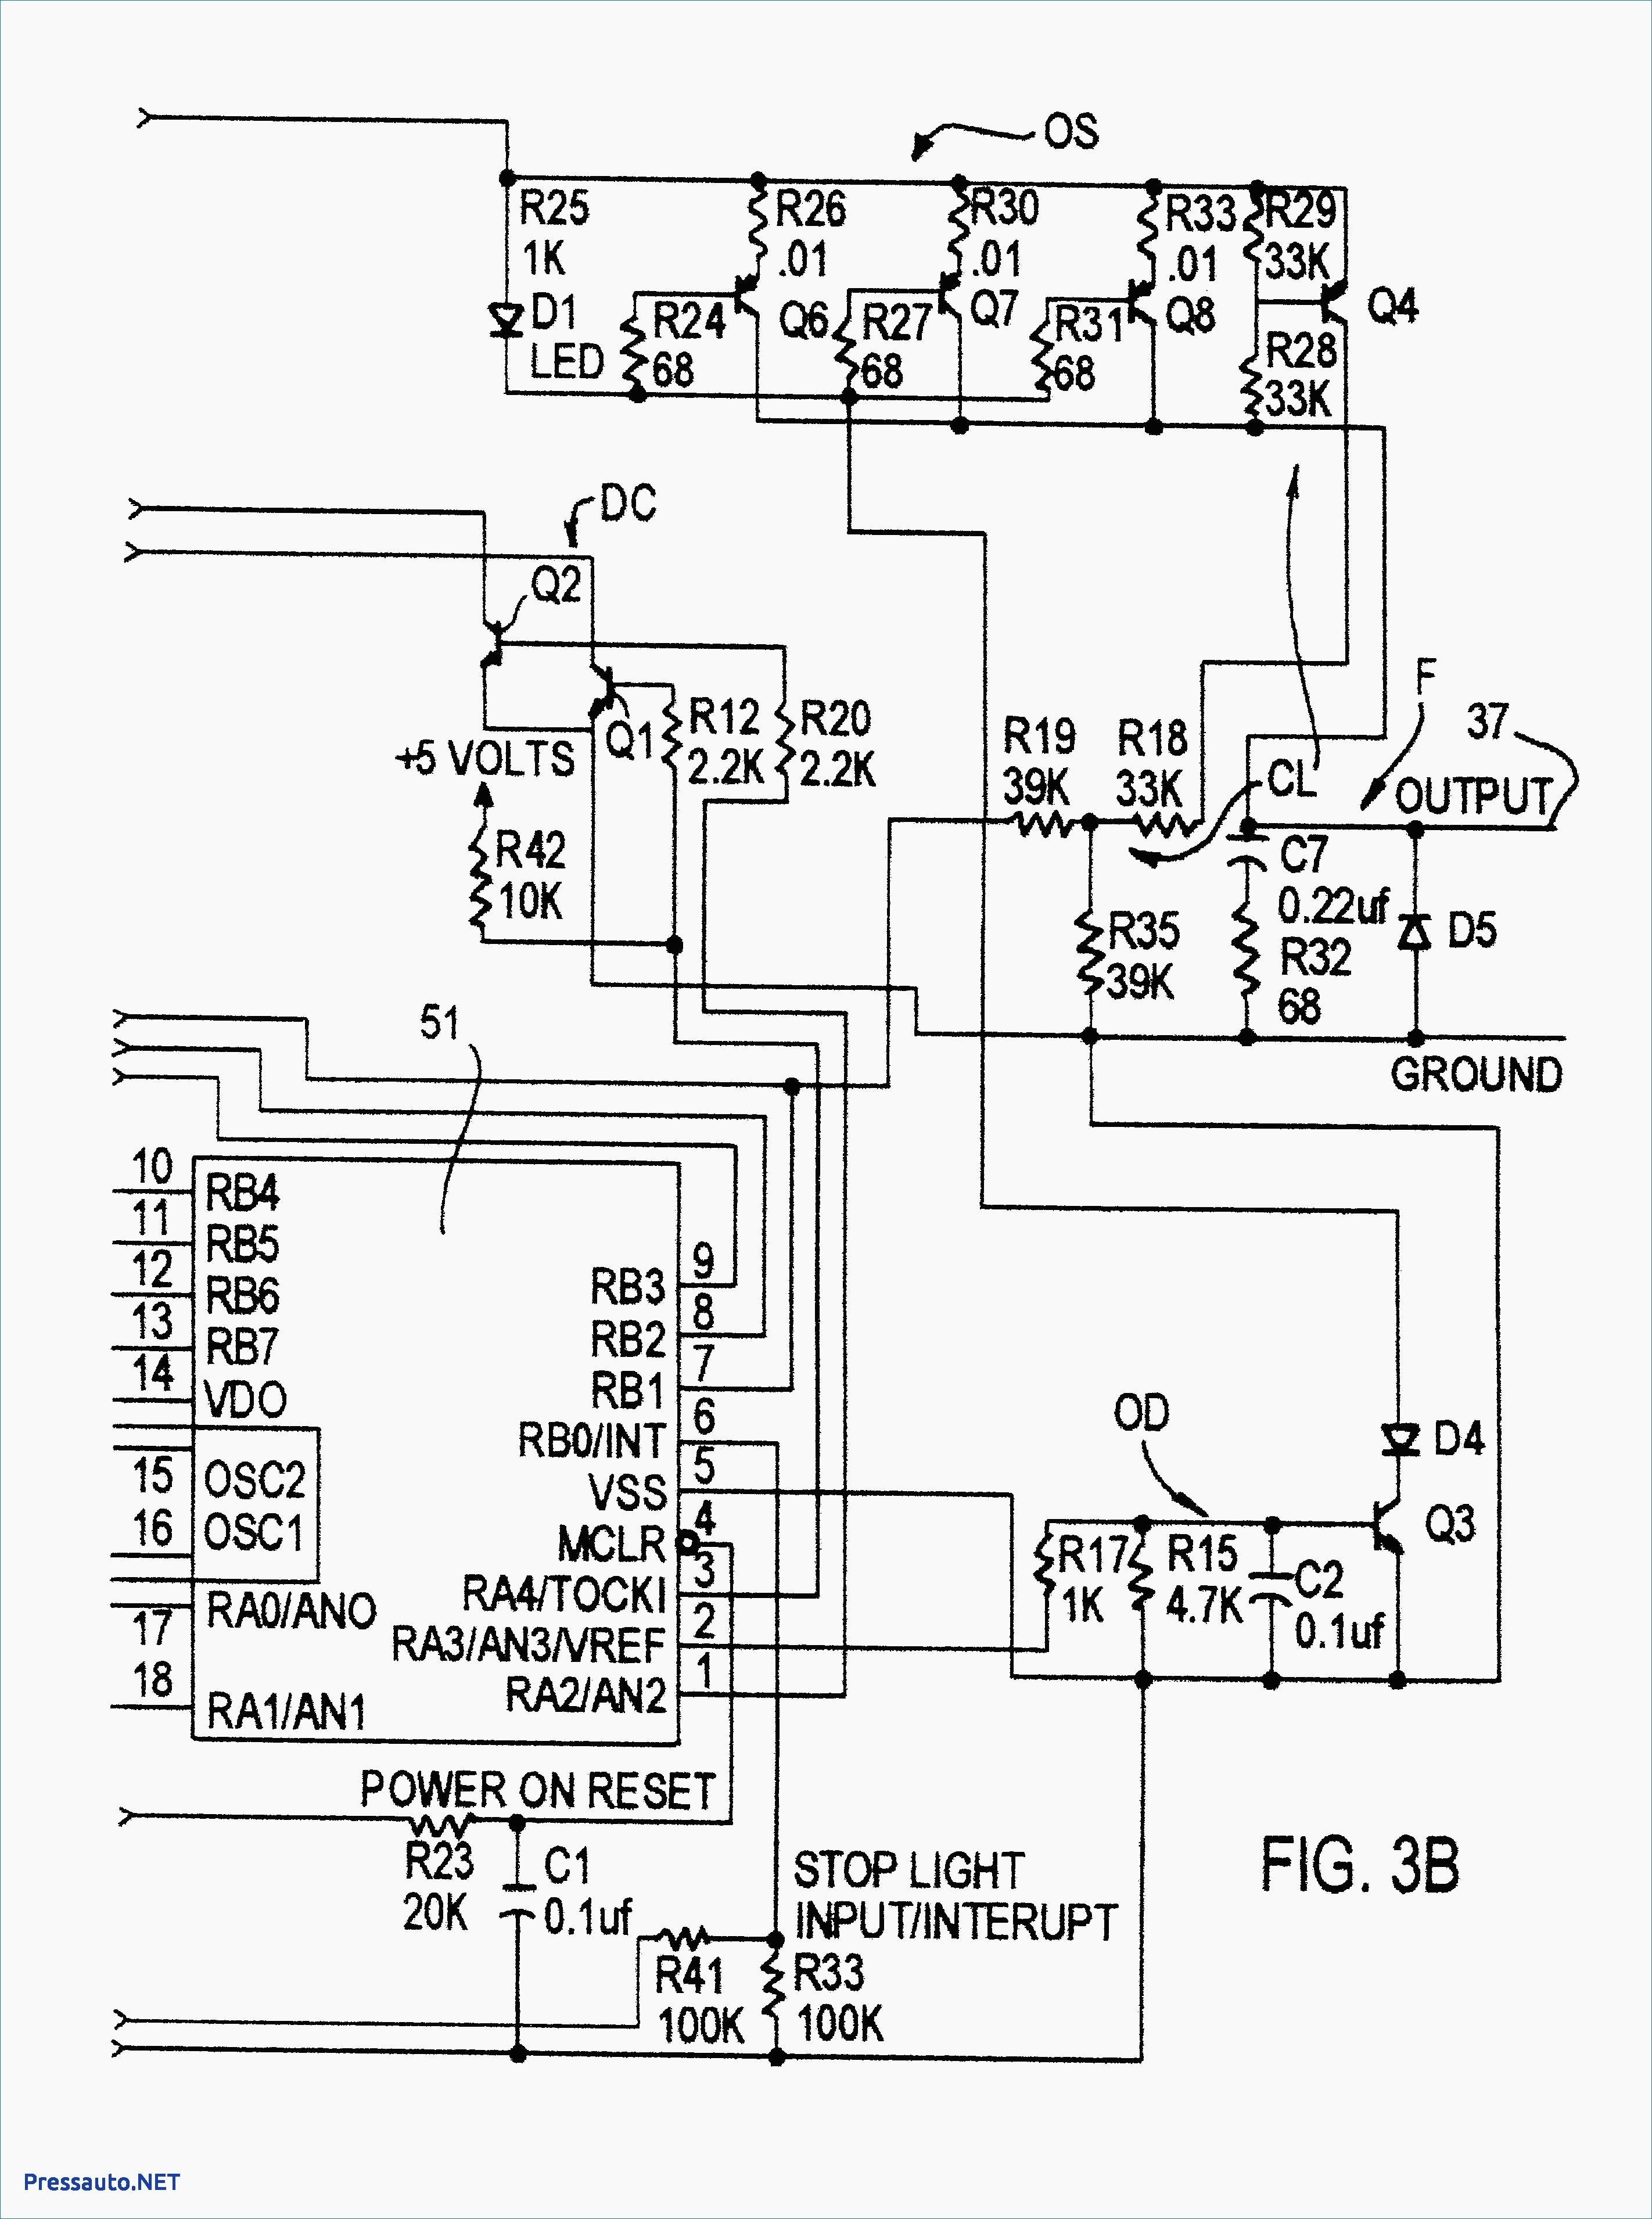 Usb Outlet Wiring Diagram Auto Diagrams Instructions